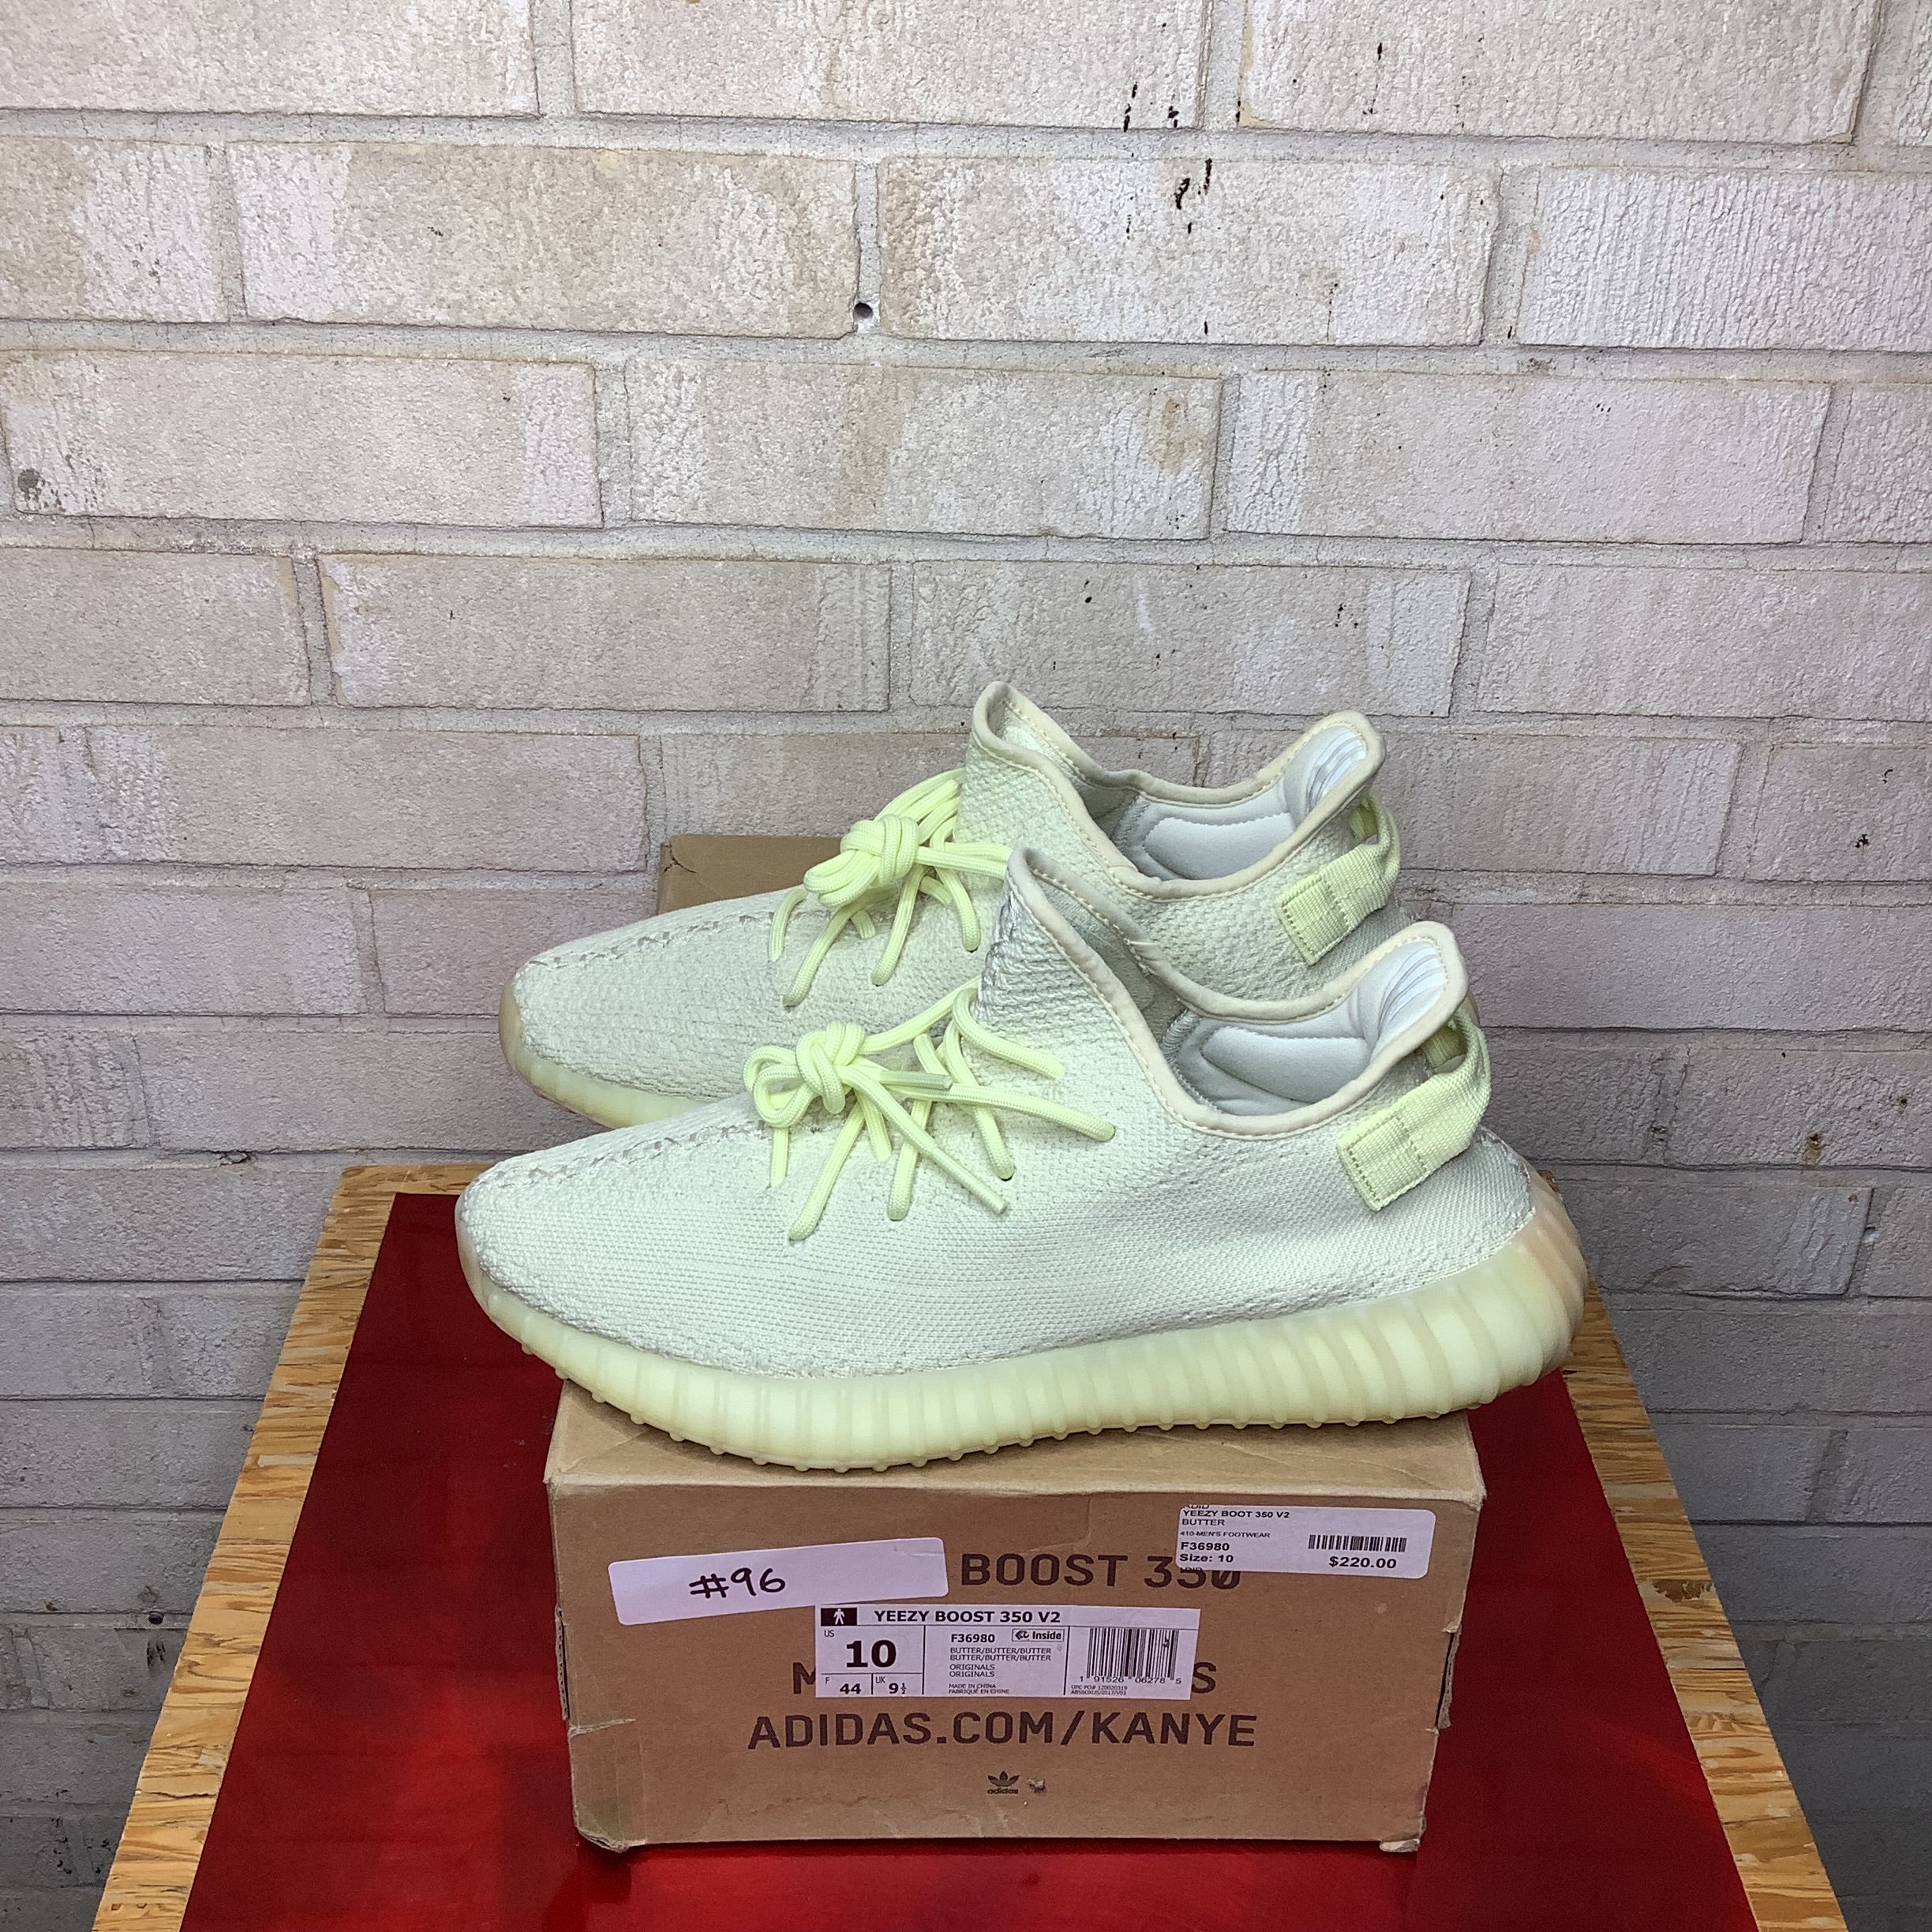 ADIDAS YEEZY 350 V2 BUTTER SIZE 10 F36980